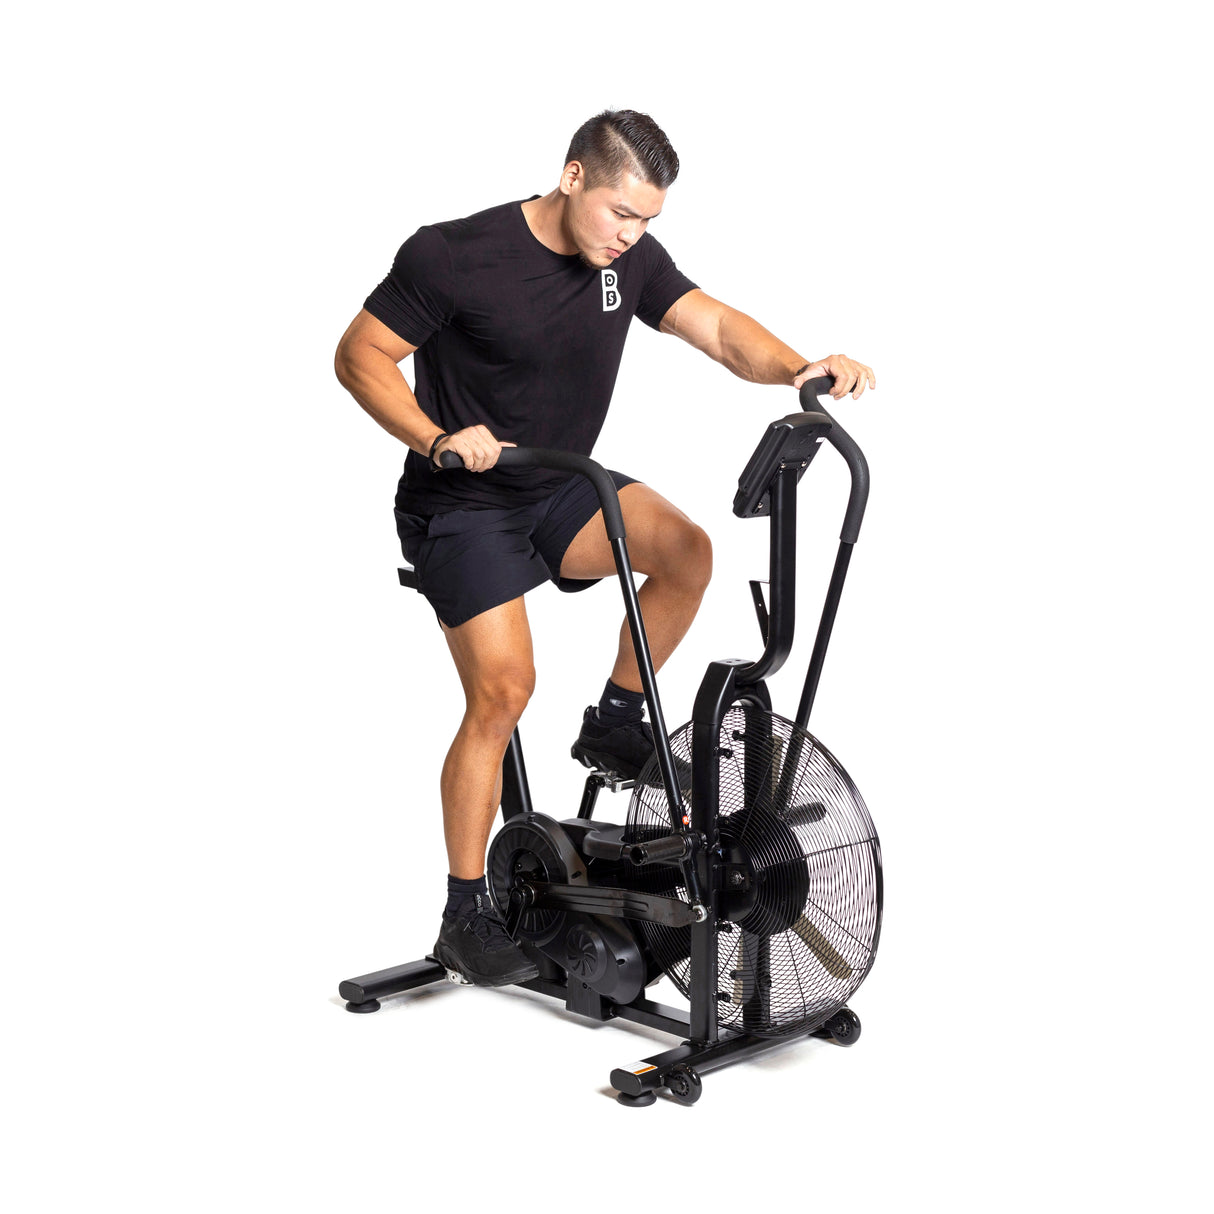 Male athlete with the Residential Air BIke: Side profile of a space-saving exercise bike with ergonomic design